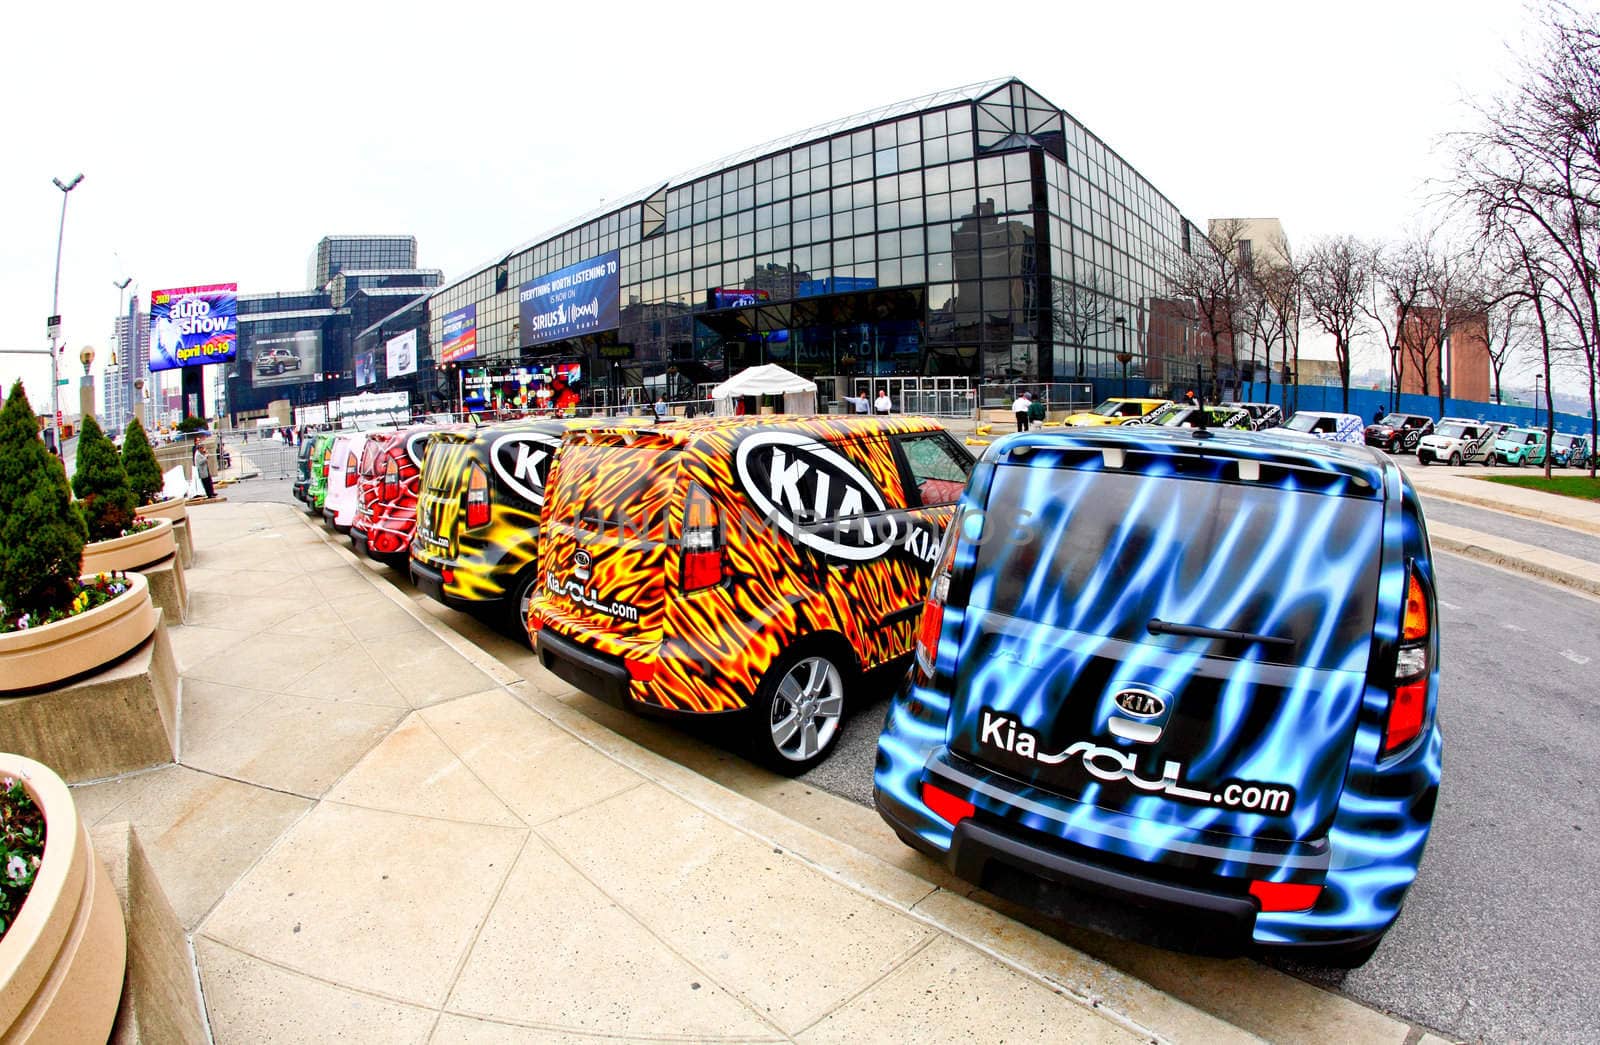 New York City, April 10, 2009: The opening day of NY International Auto Show 2009. The auto industry is struggling in the current economic crisis.